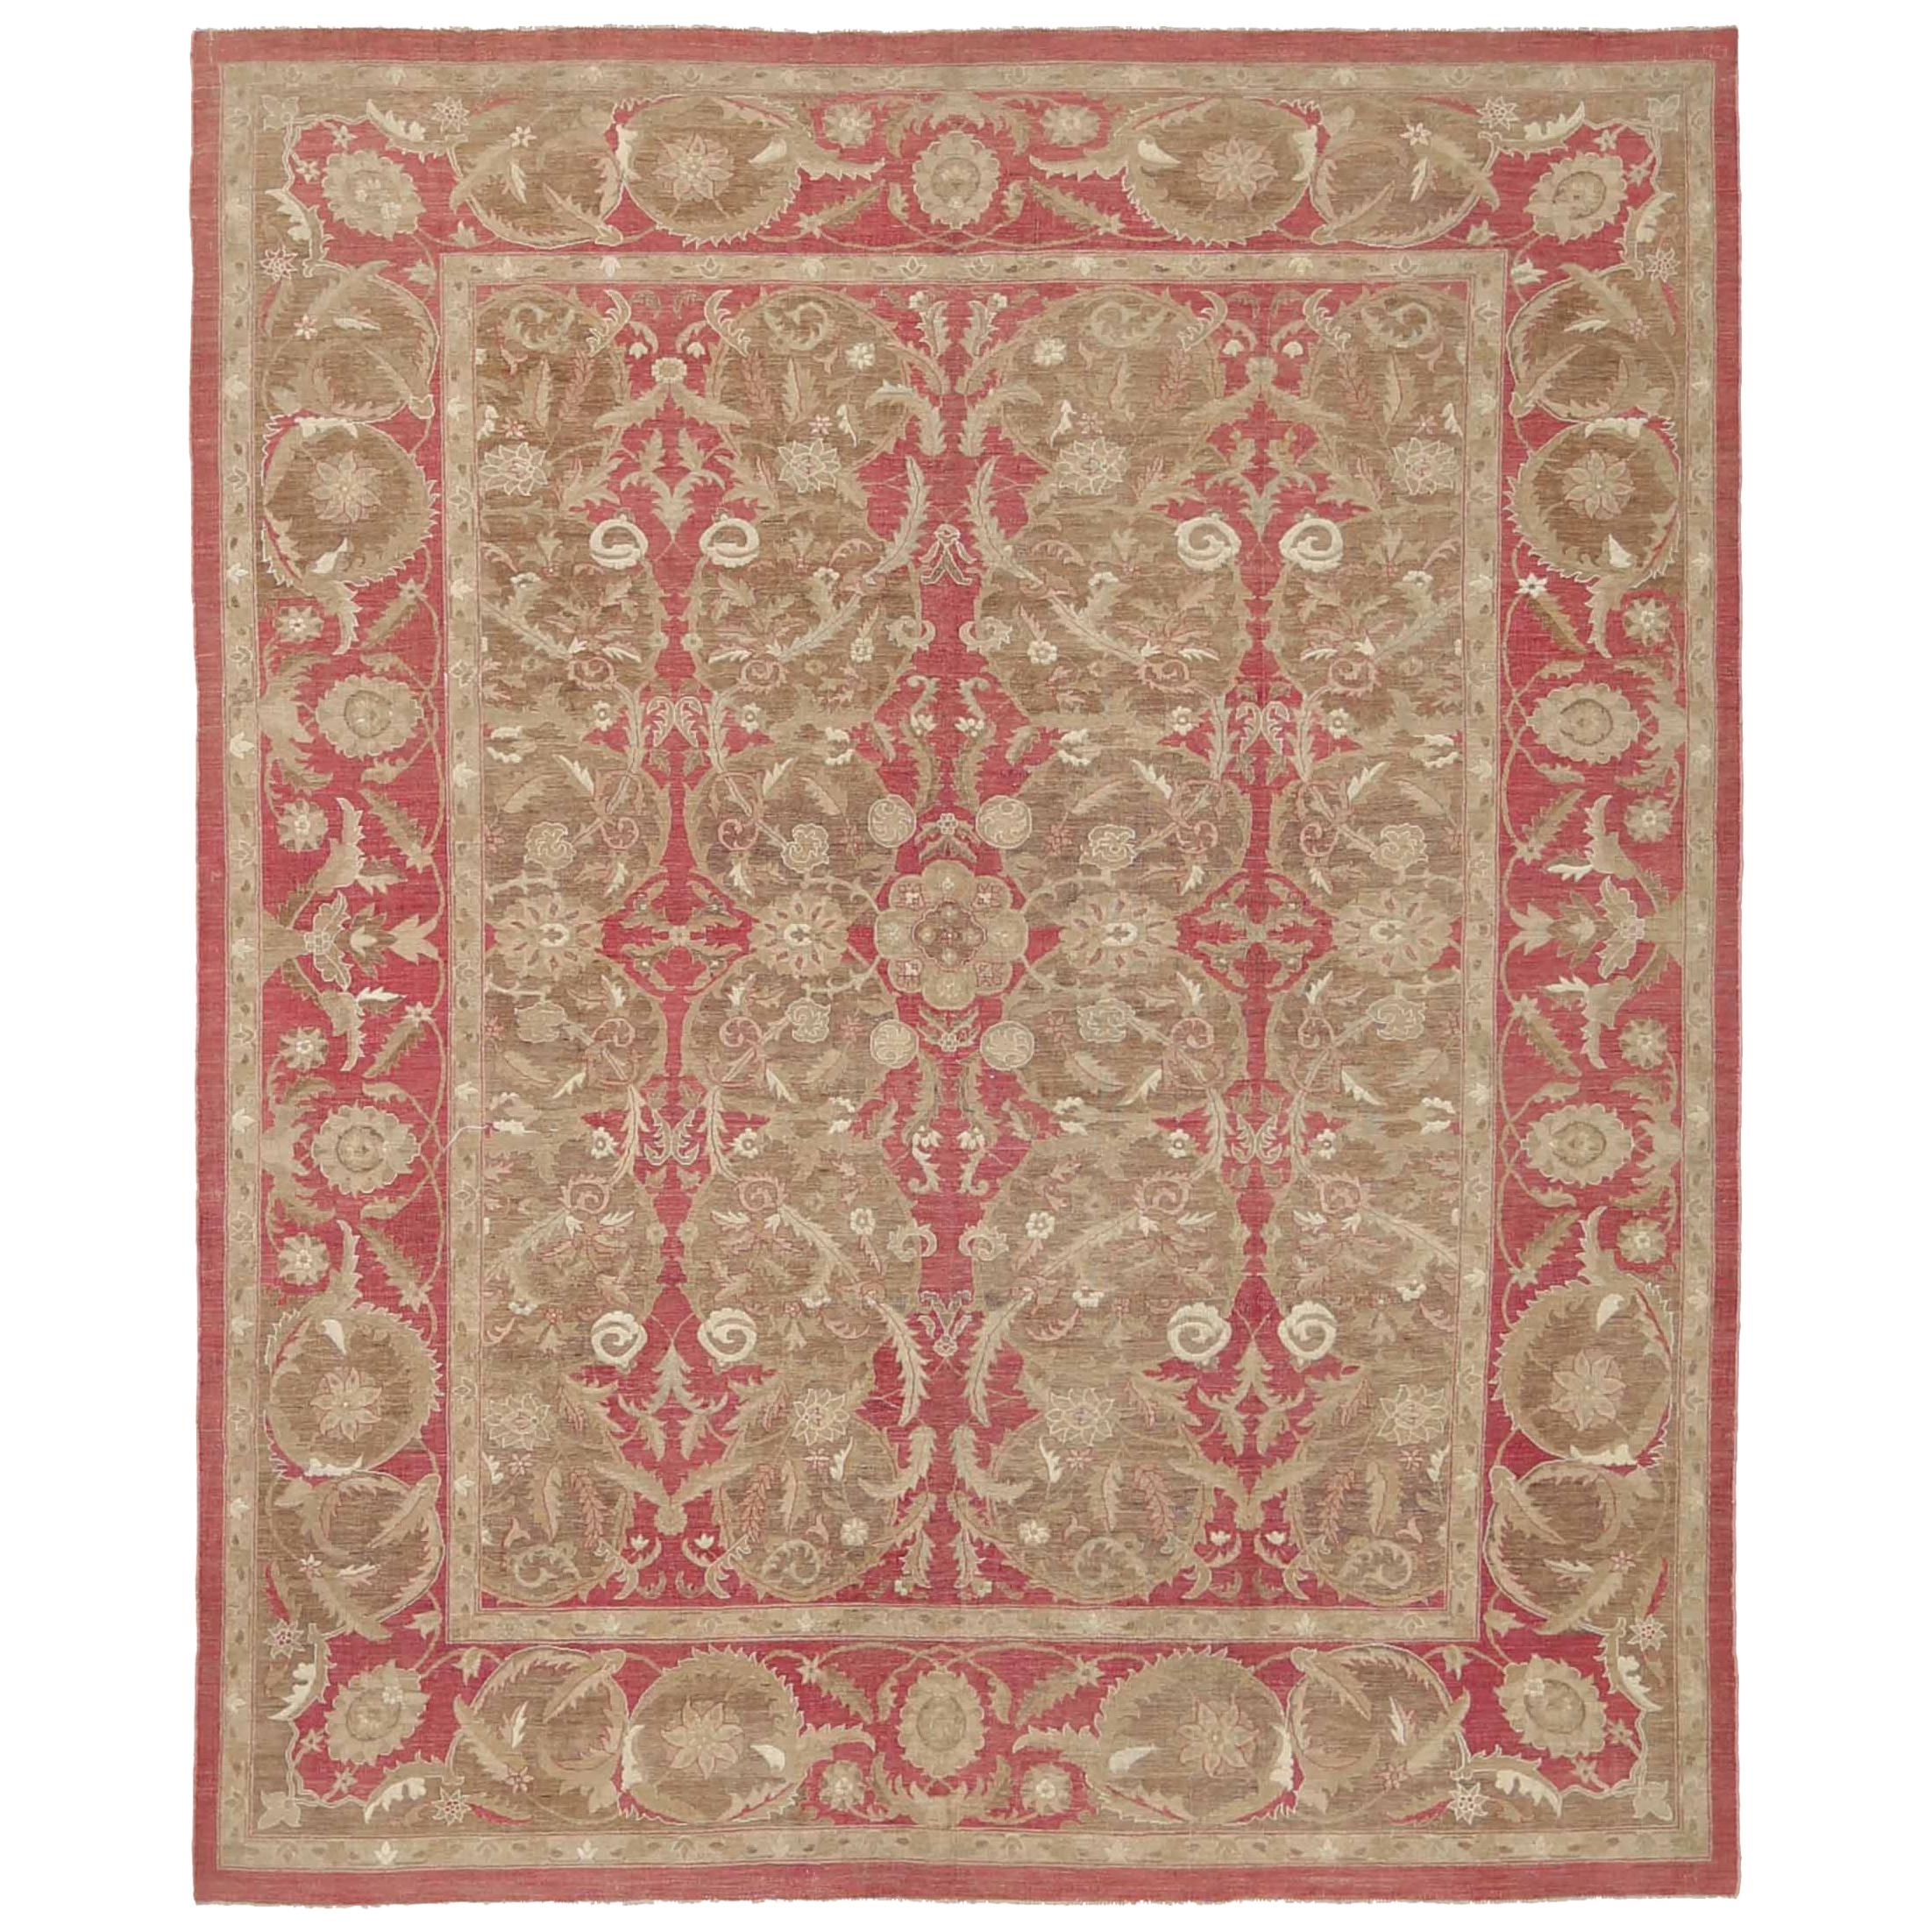 New Haji Jalili Design Afghan Area Rug with 17th-Century Antique Look For Sale